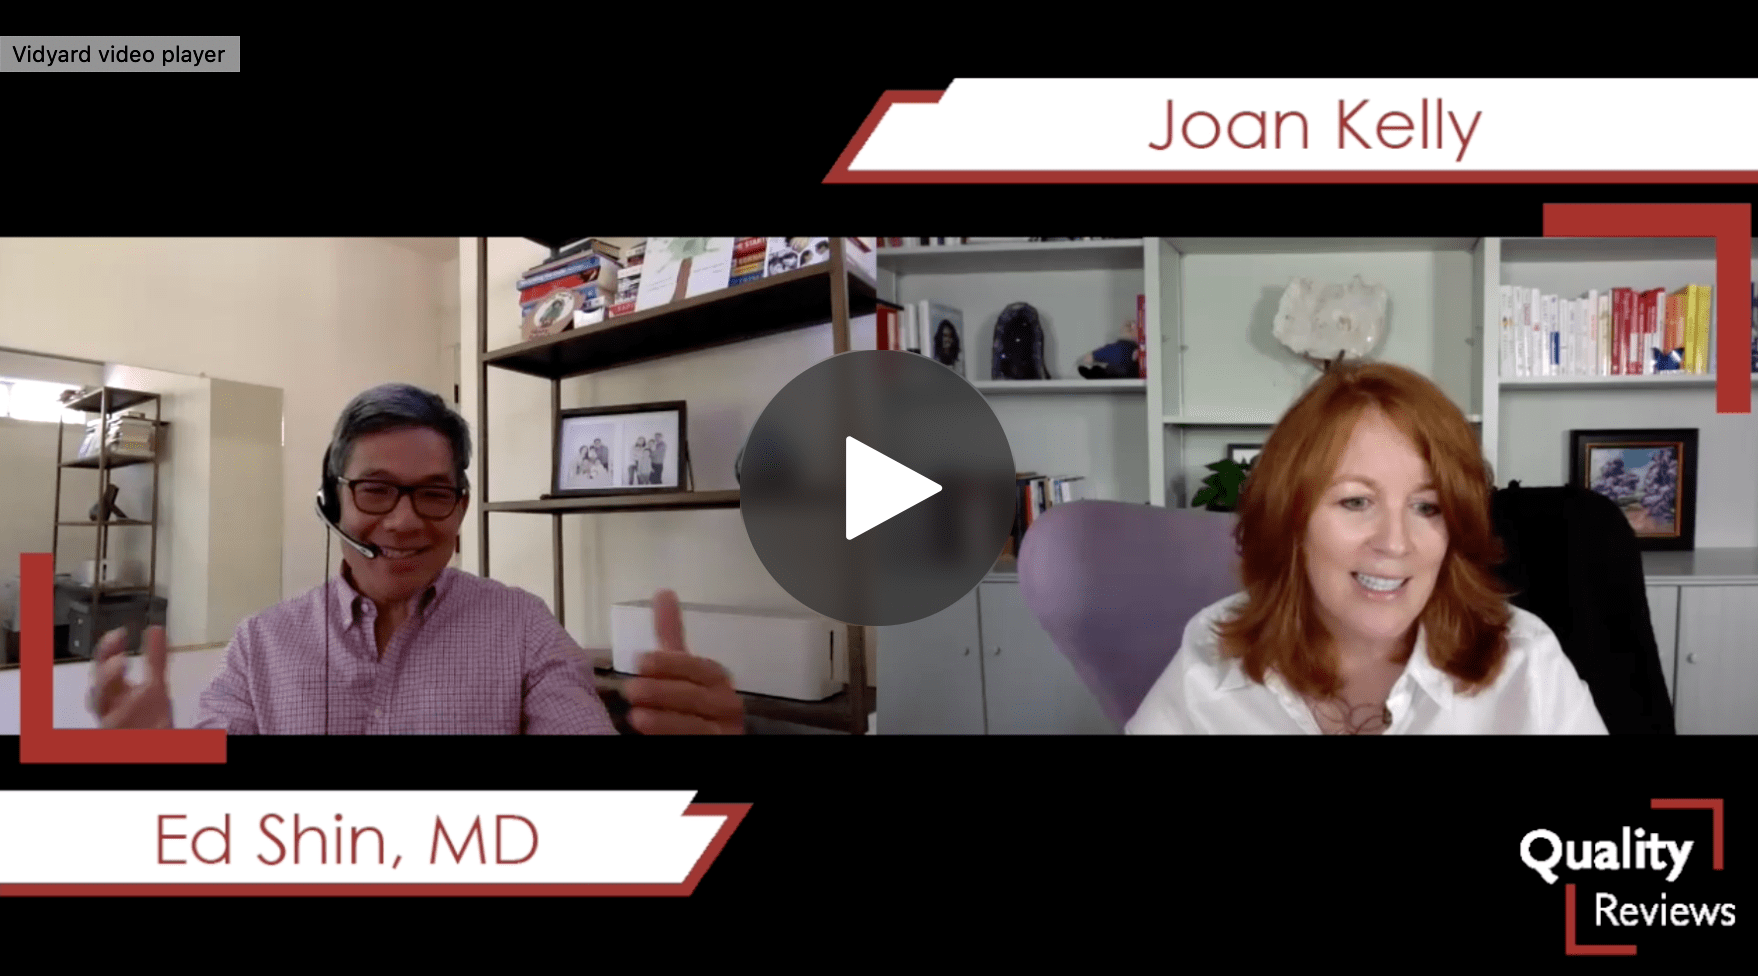 Real-World Lessons in Patient Experience: A Conversation with Joan Kelly